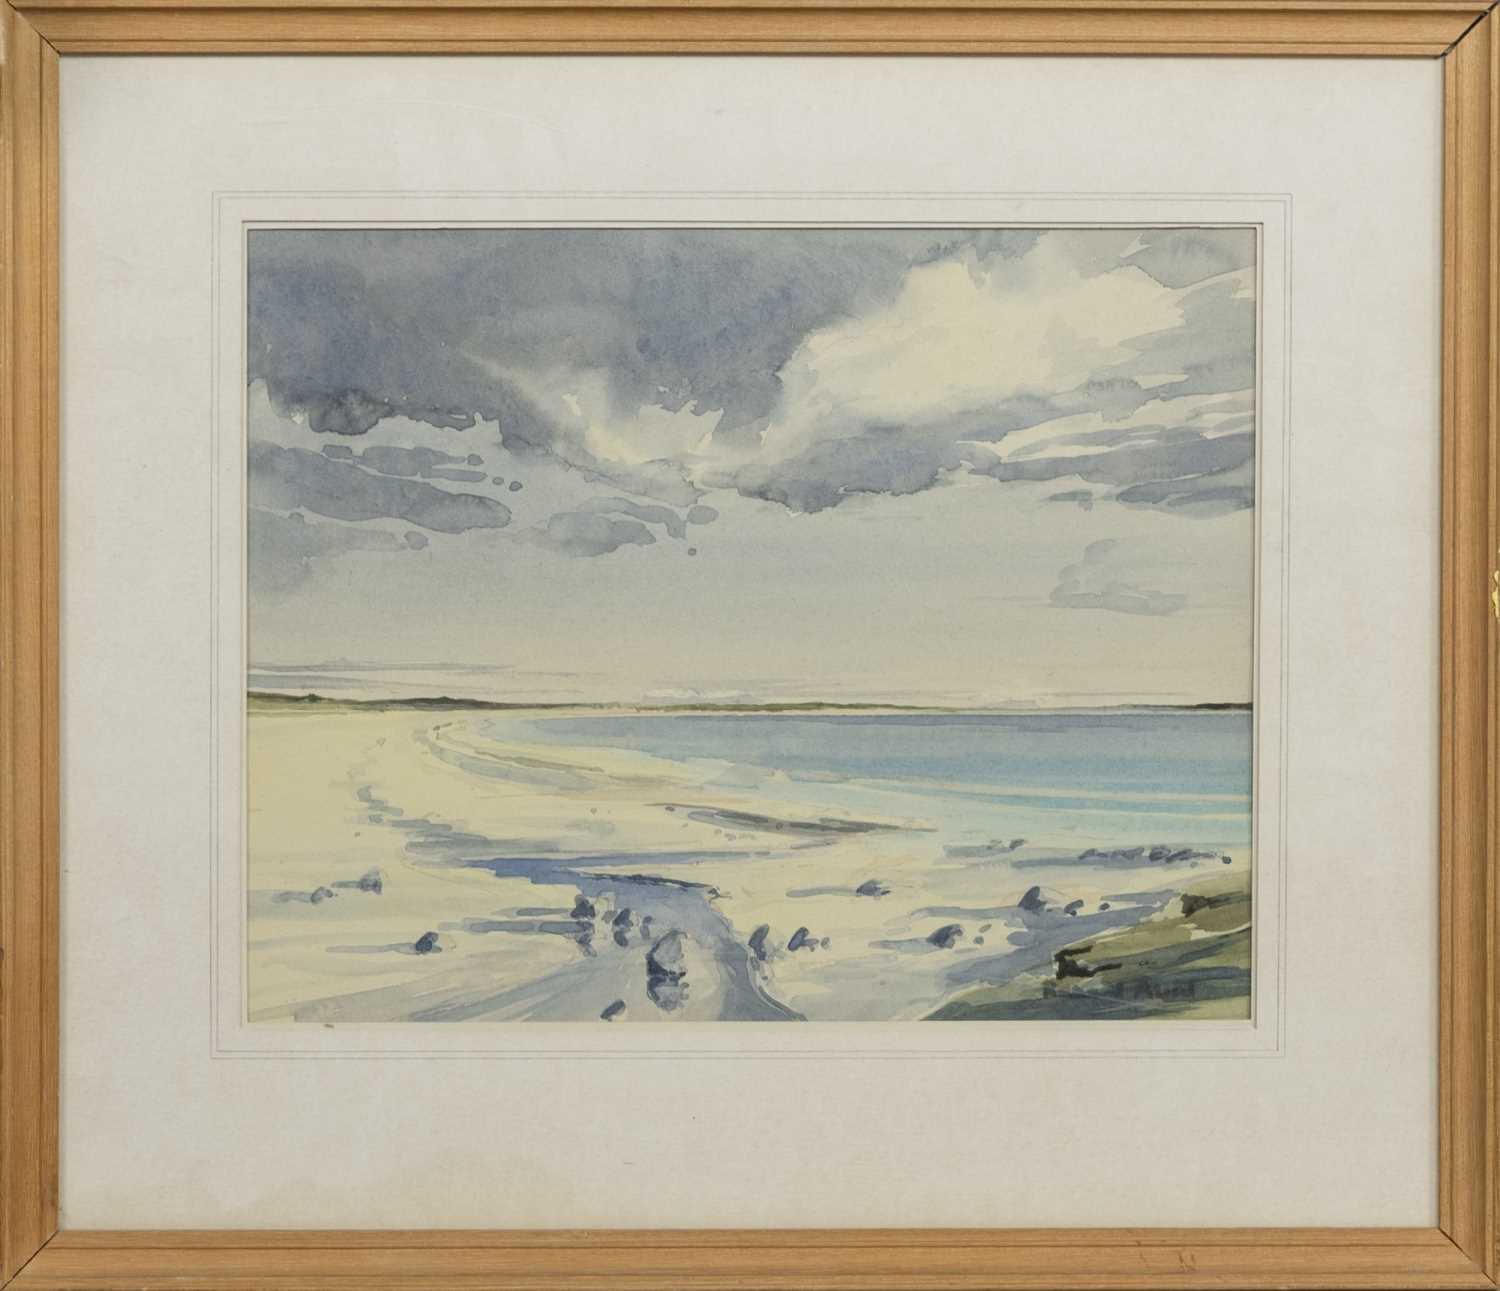 Lot 72 - EAST COAST, TIREE, A WATERCOLOUR BY RICHARD ALRED